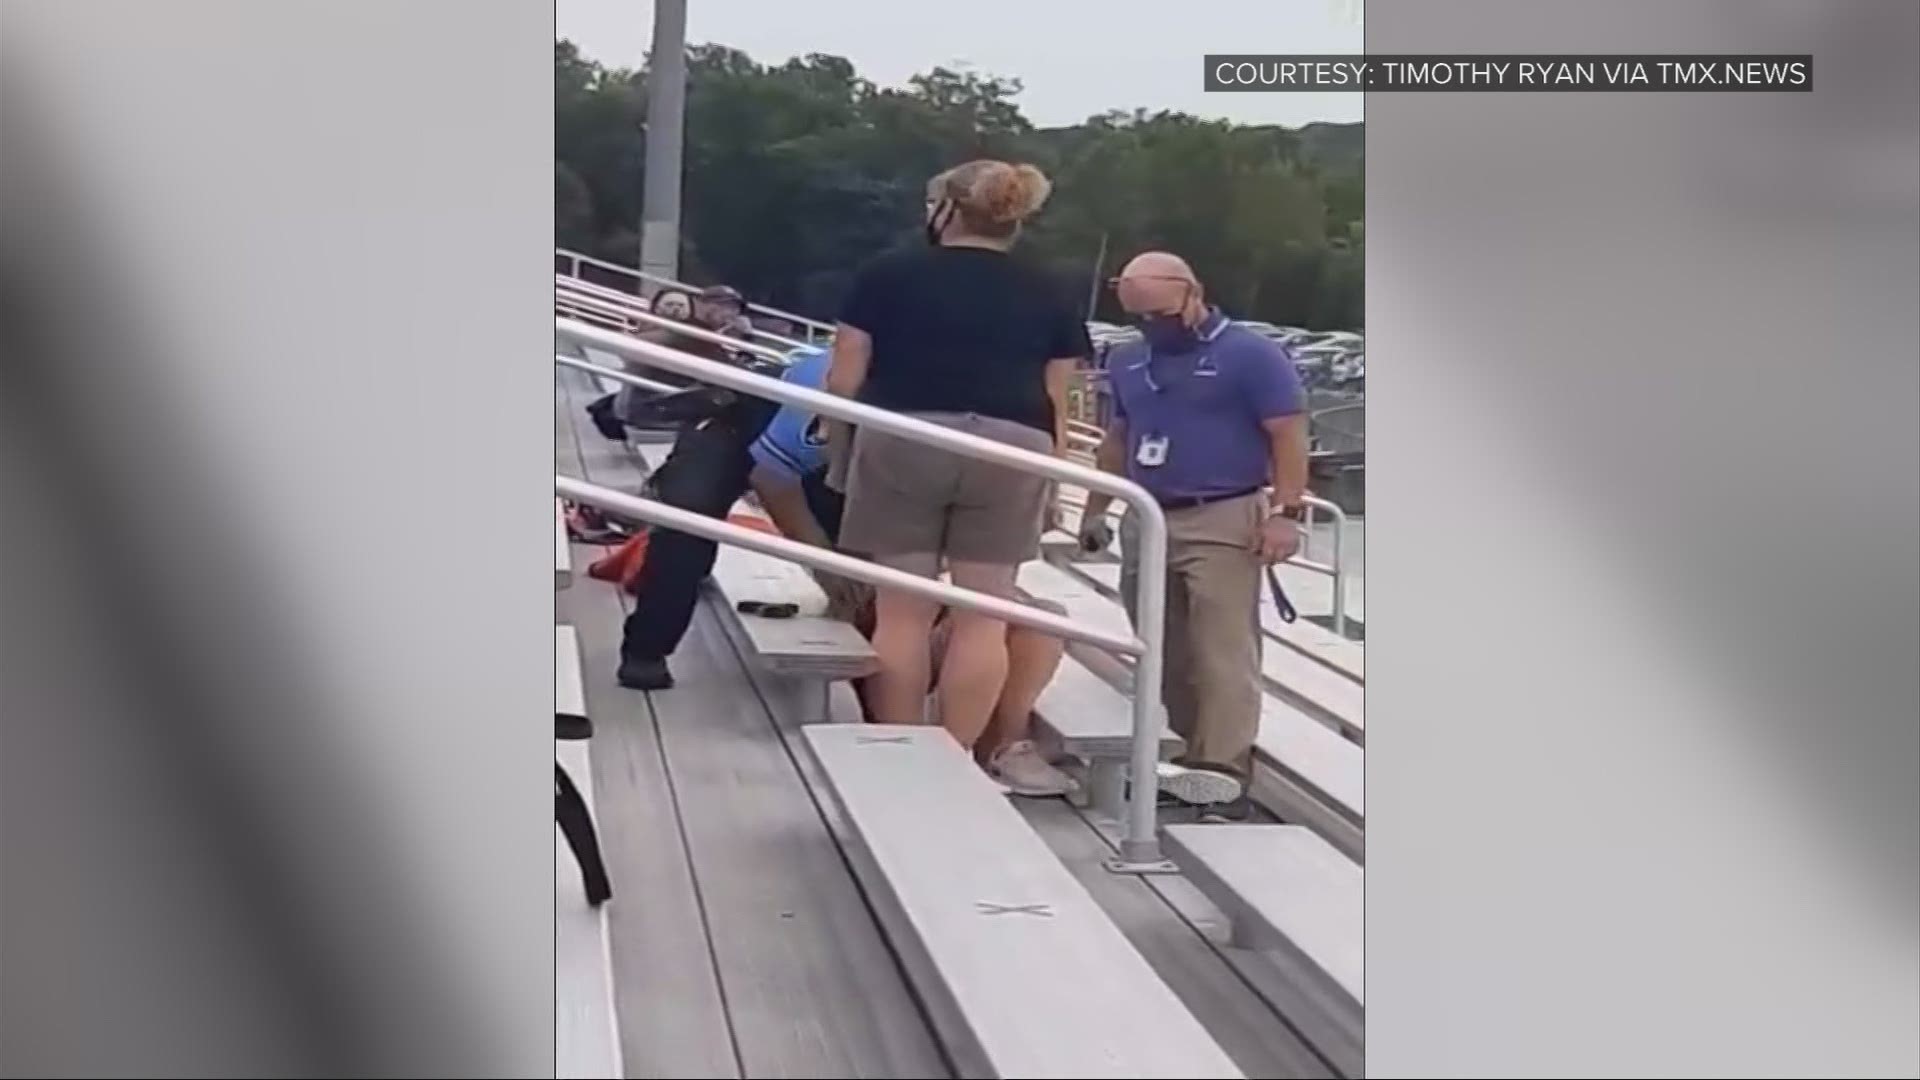 Two women are charged in connection to a dispute over a mask requirement at a football game in Logan.